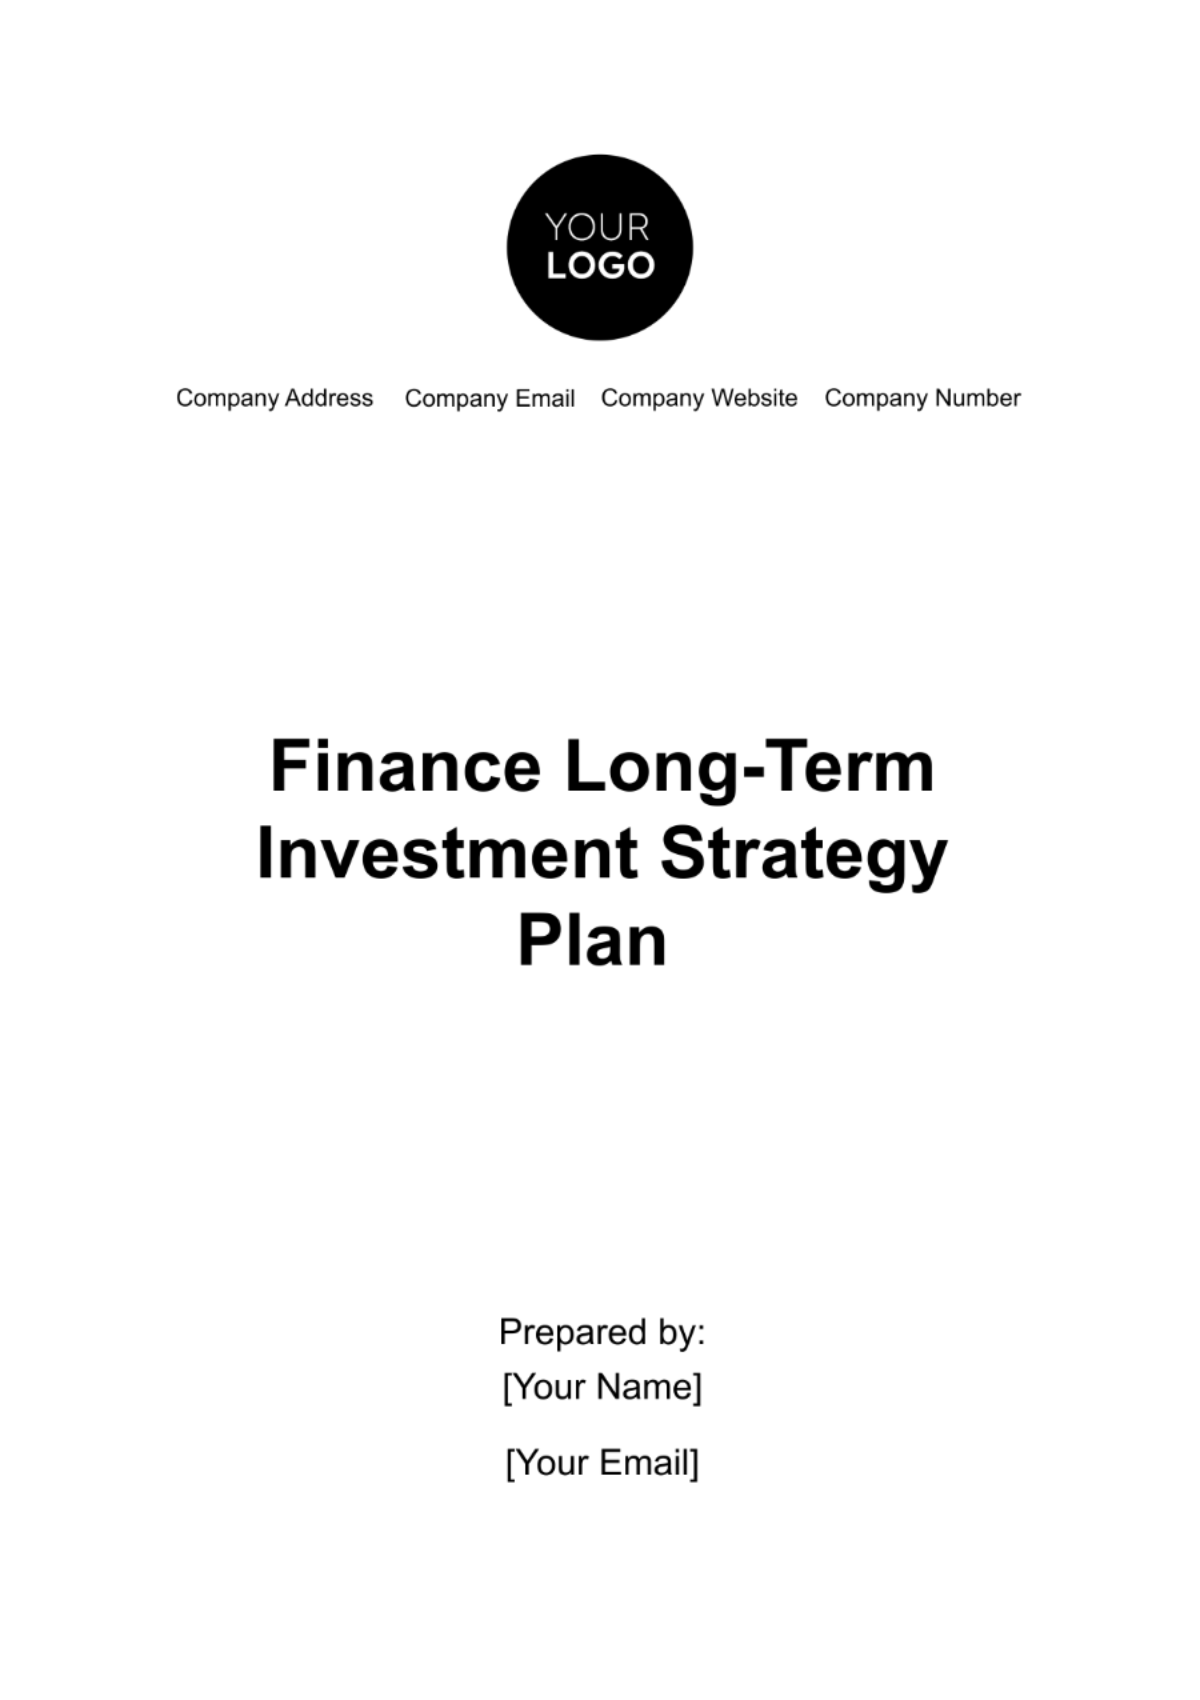 Finance Long-Term Investment Strategy Plan Template